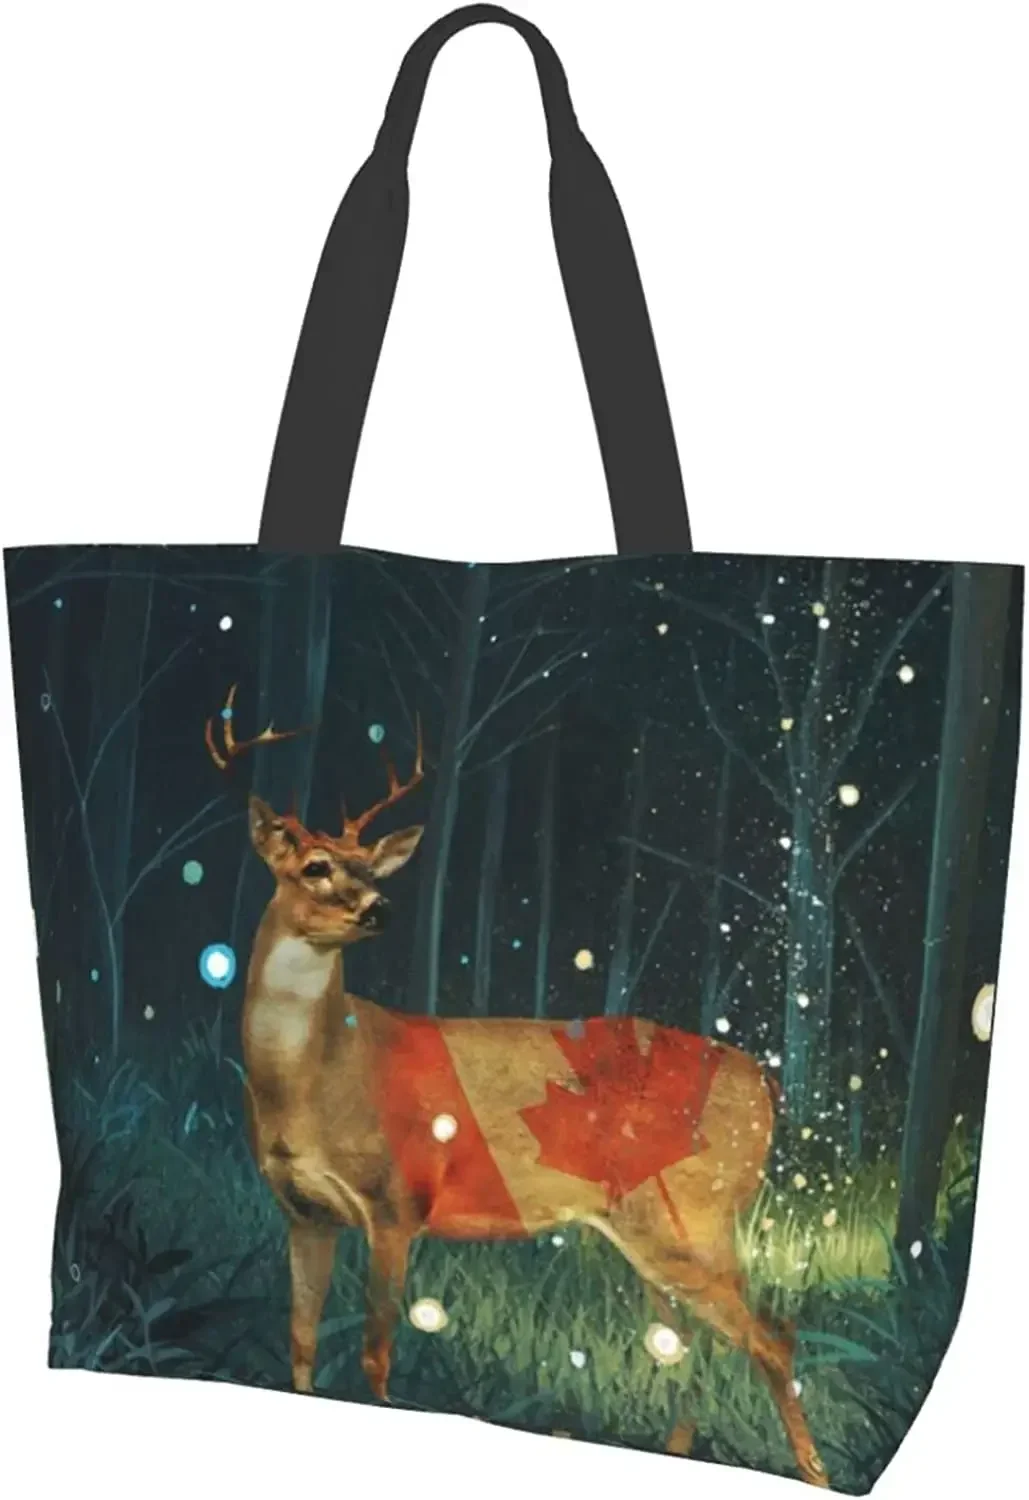 

Deer In The Fantasy Forest Women'S Large Capacity Shoulder Shopping Bag, Funny Animals Lightweight Crossbody Tote Organizer